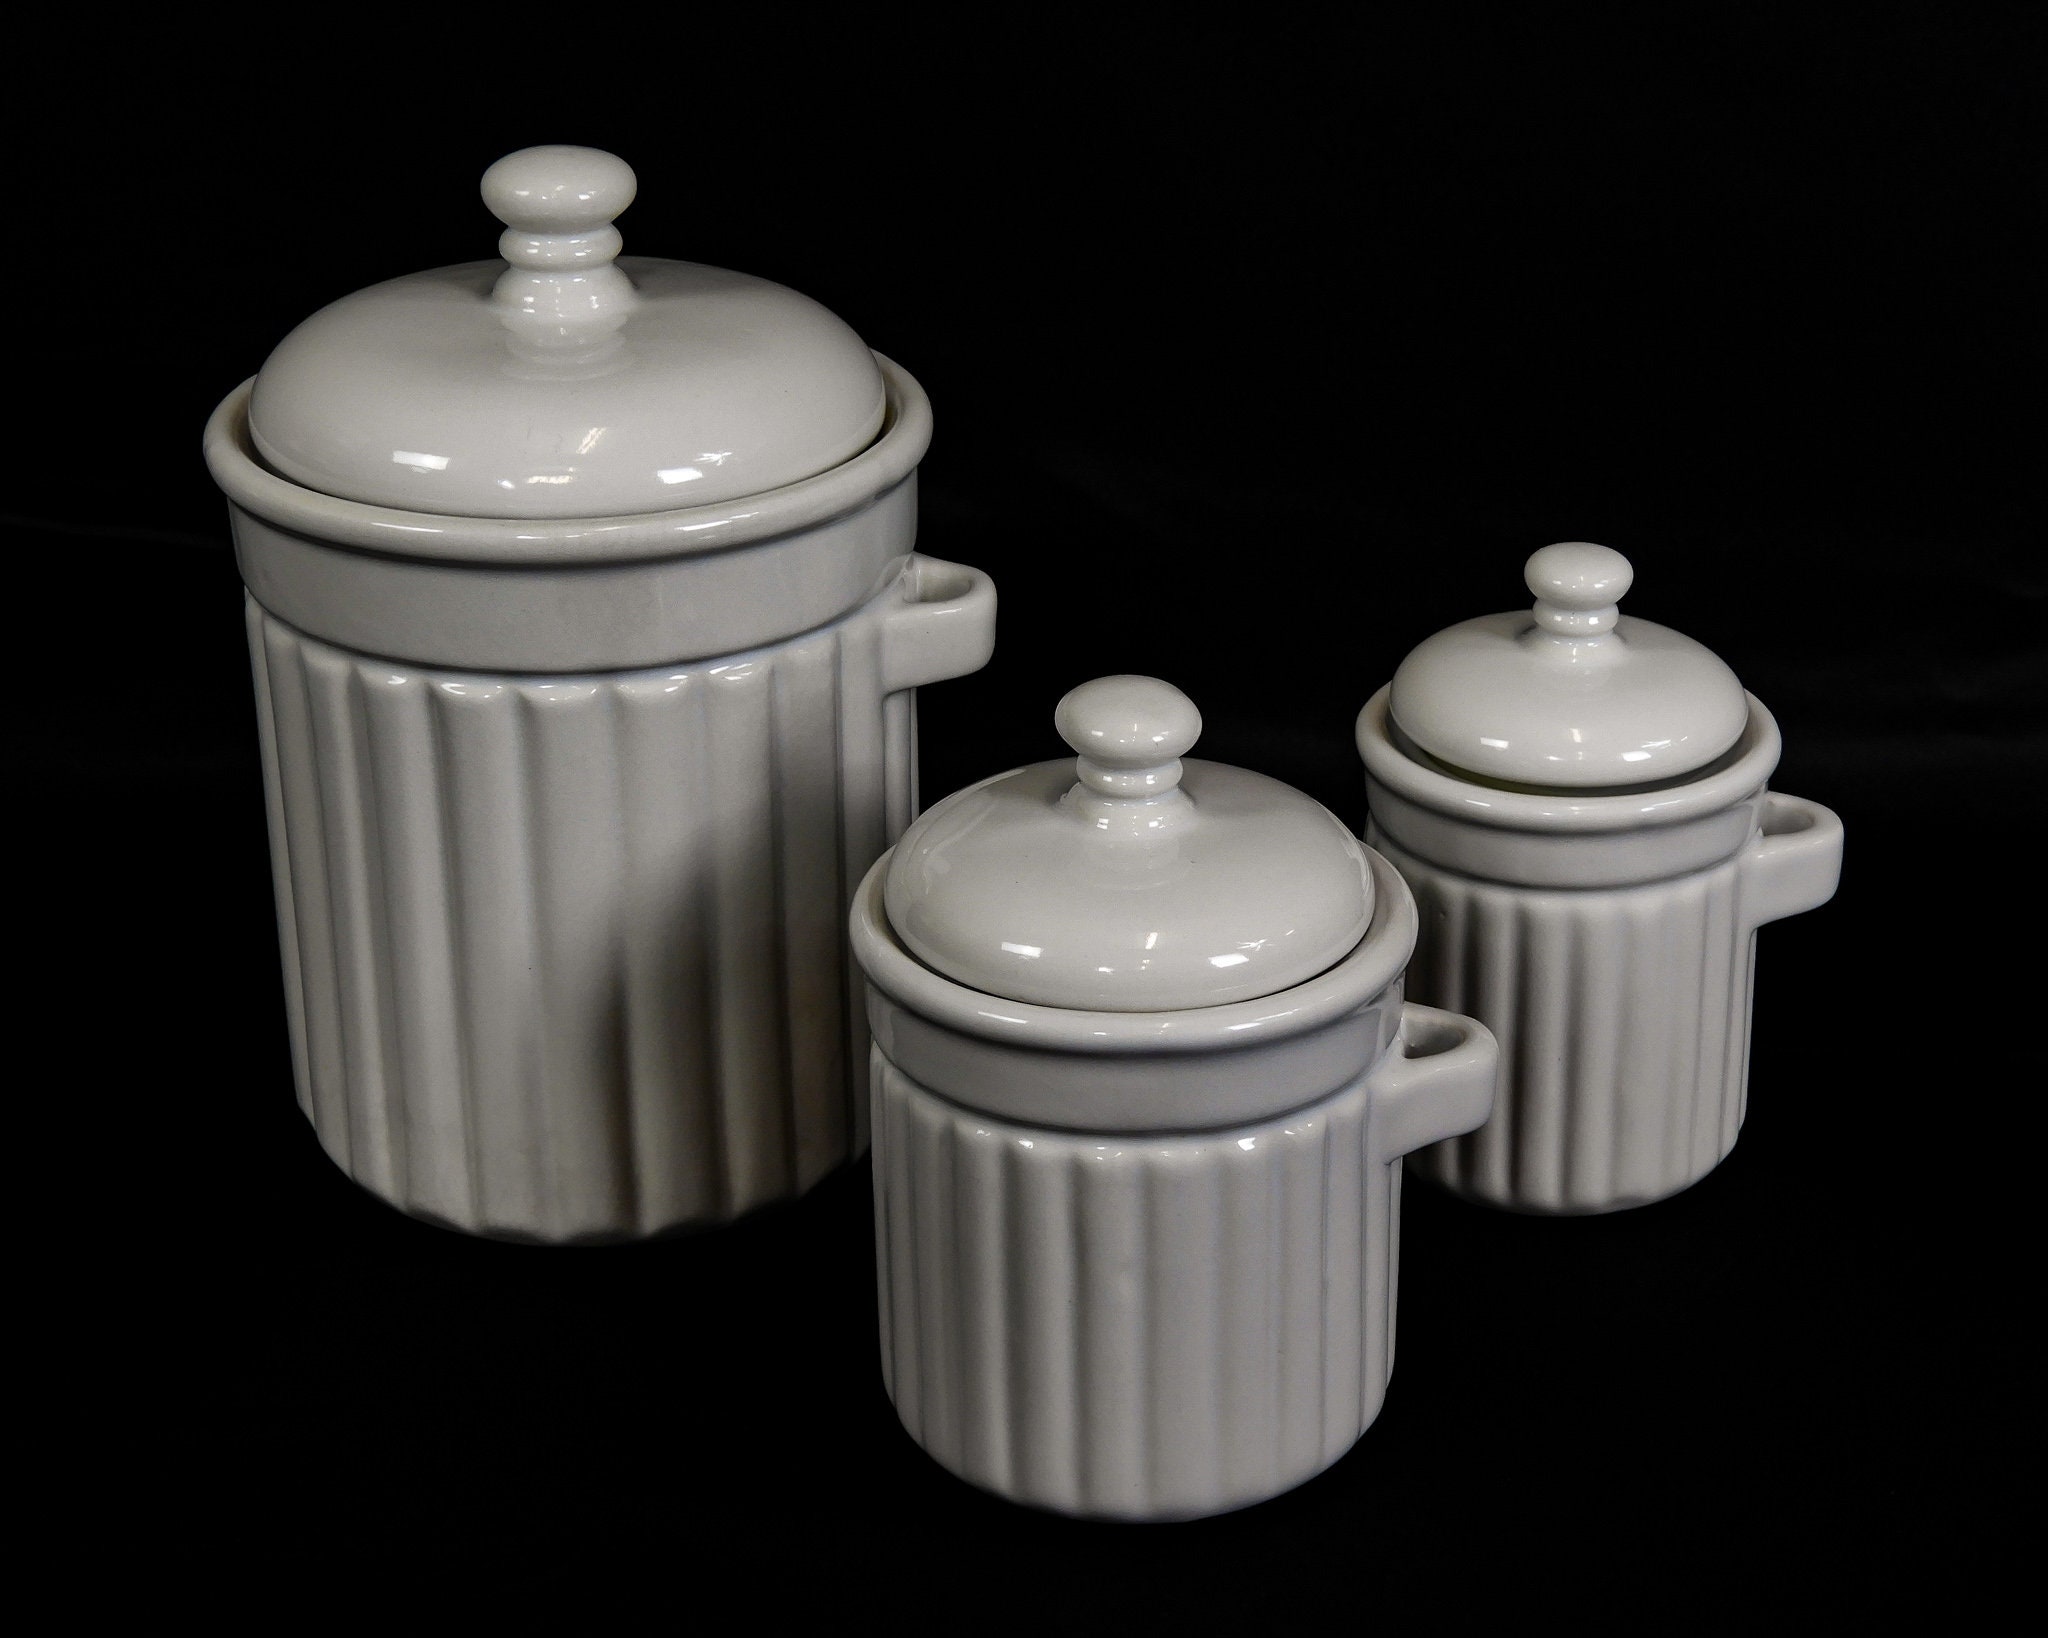 Vintage White Canisters Kitchen Storage Ceramic Canister Set Home